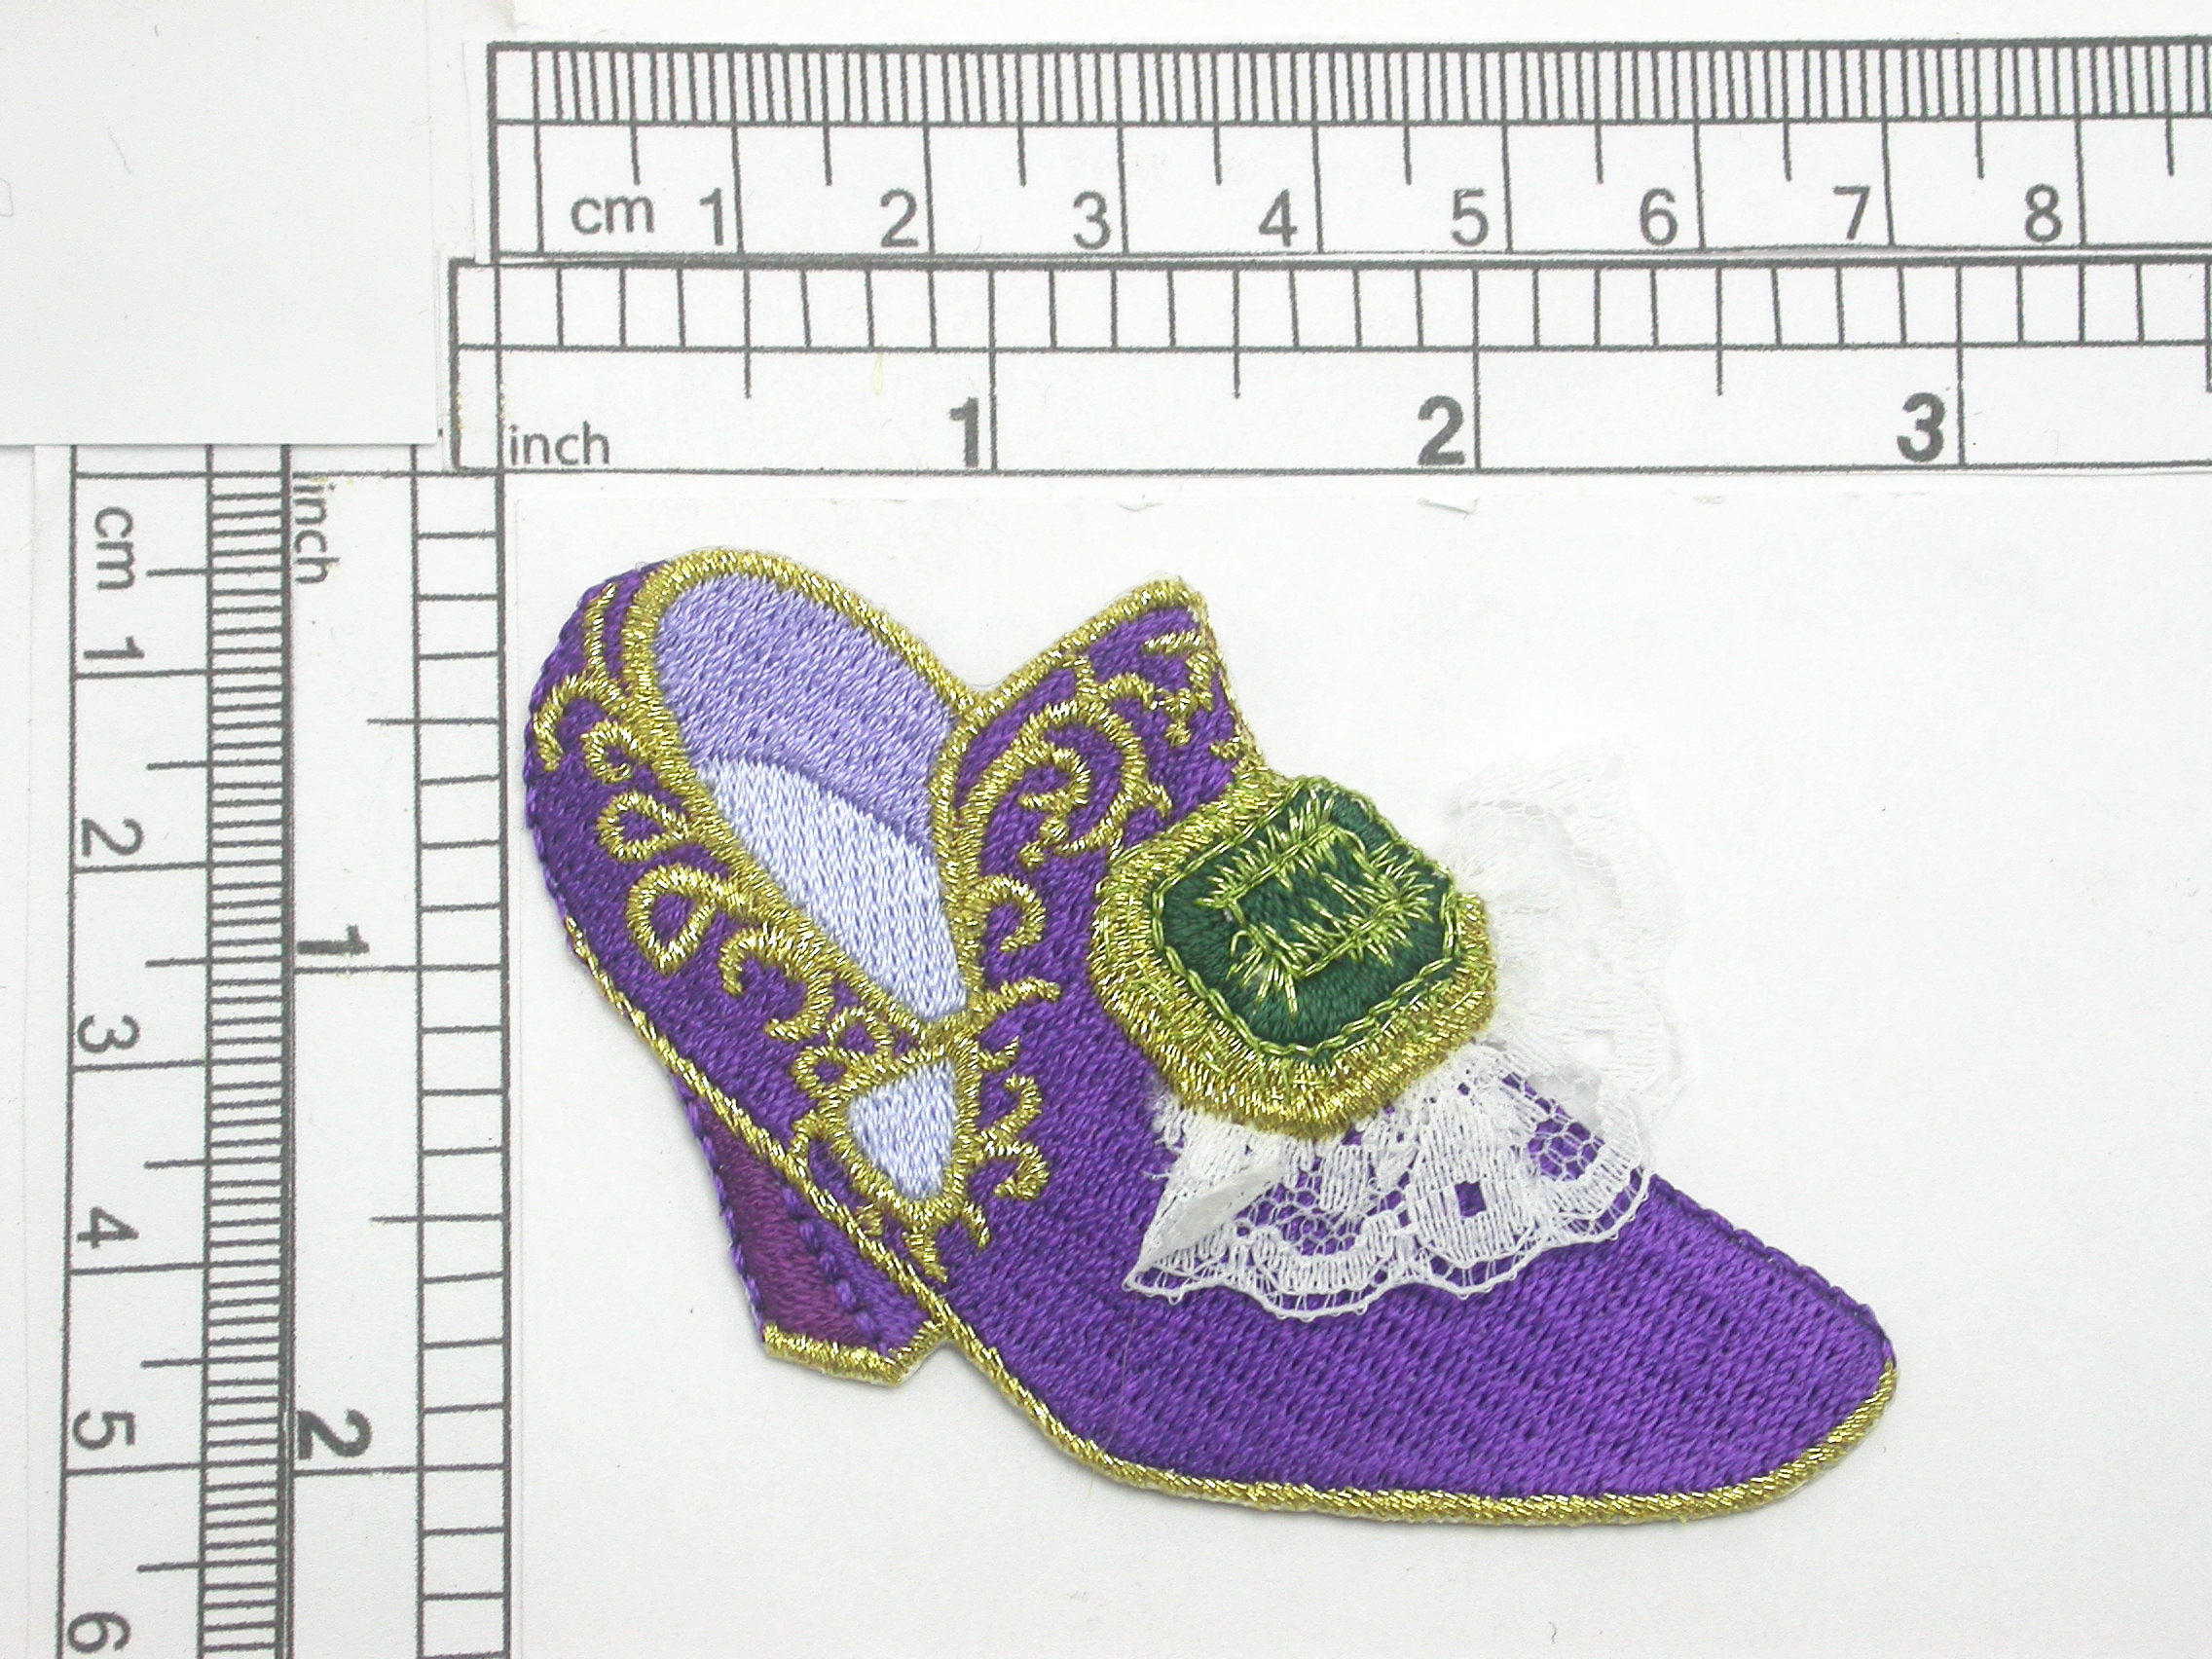 Footwear Slipper Purple Iron On Patch Applique

Fully Embroidered with Lace Detailing

Measures 1 3/4" x 3" Wide Approximately